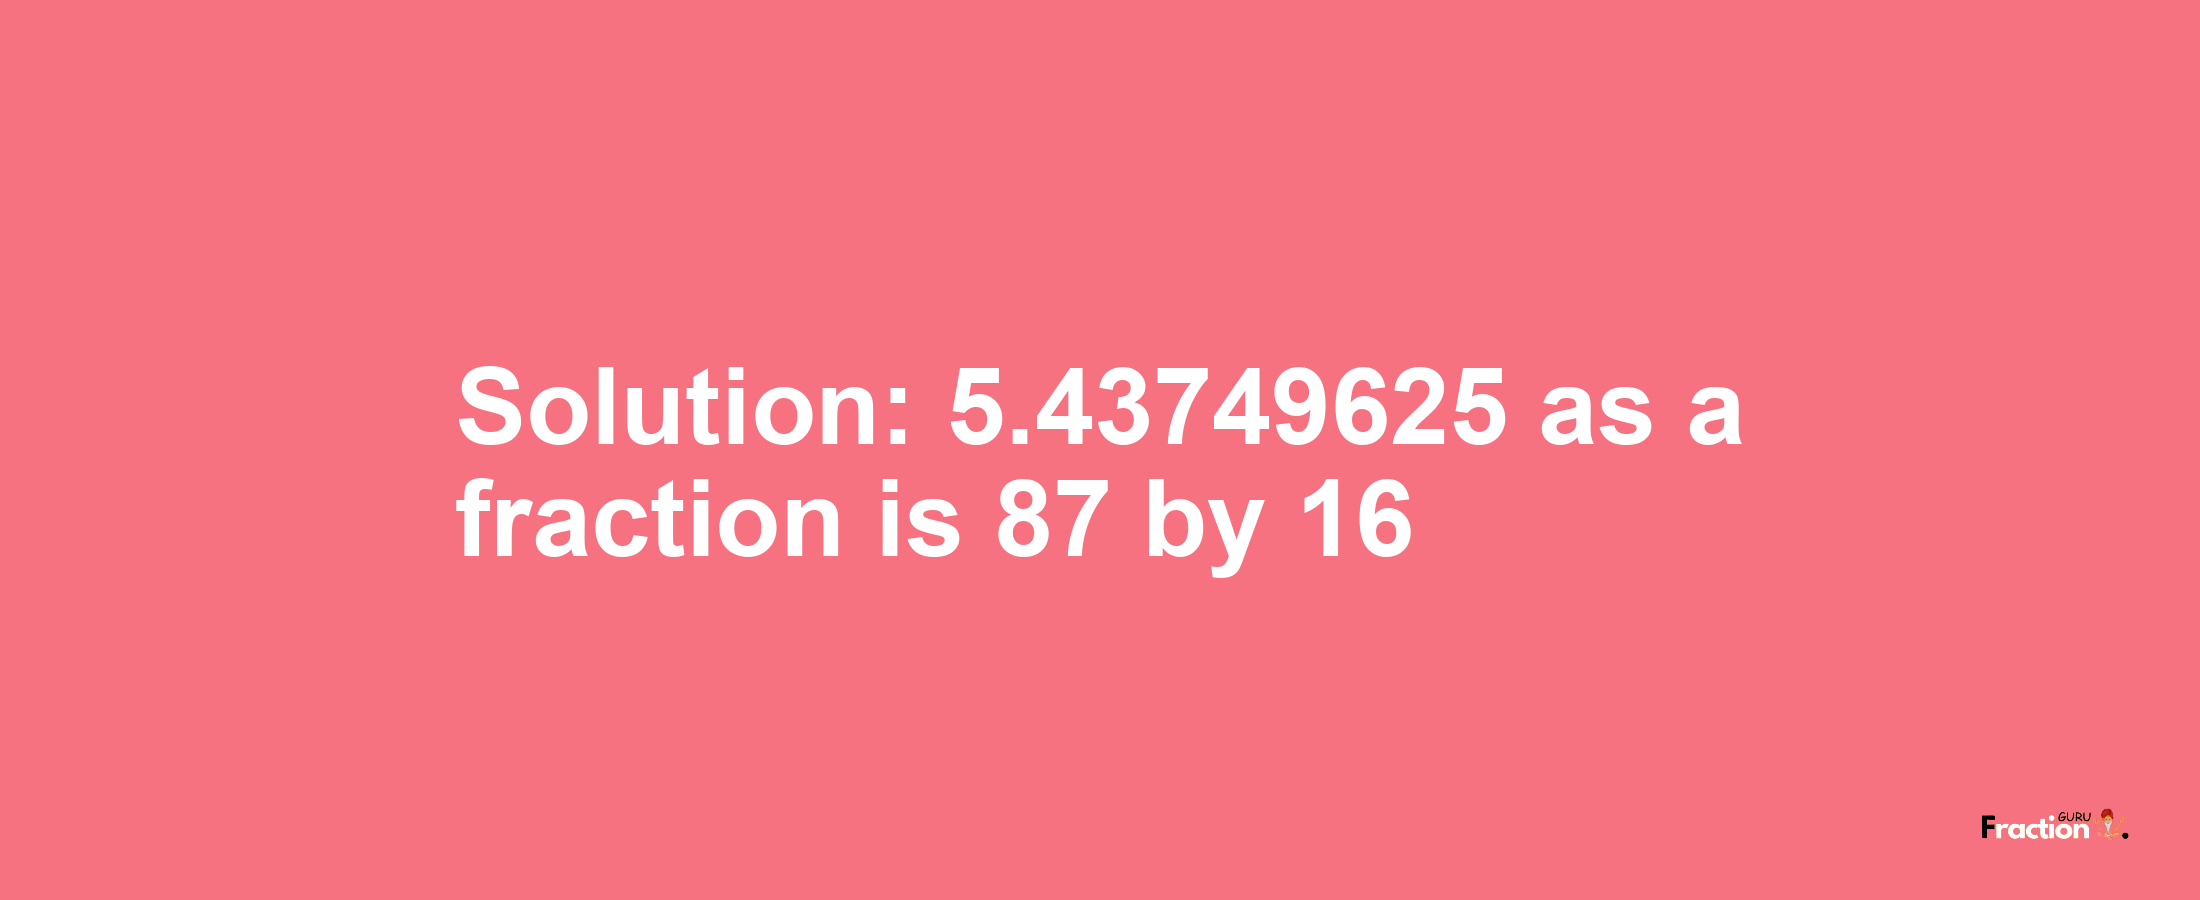 Solution:5.43749625 as a fraction is 87/16